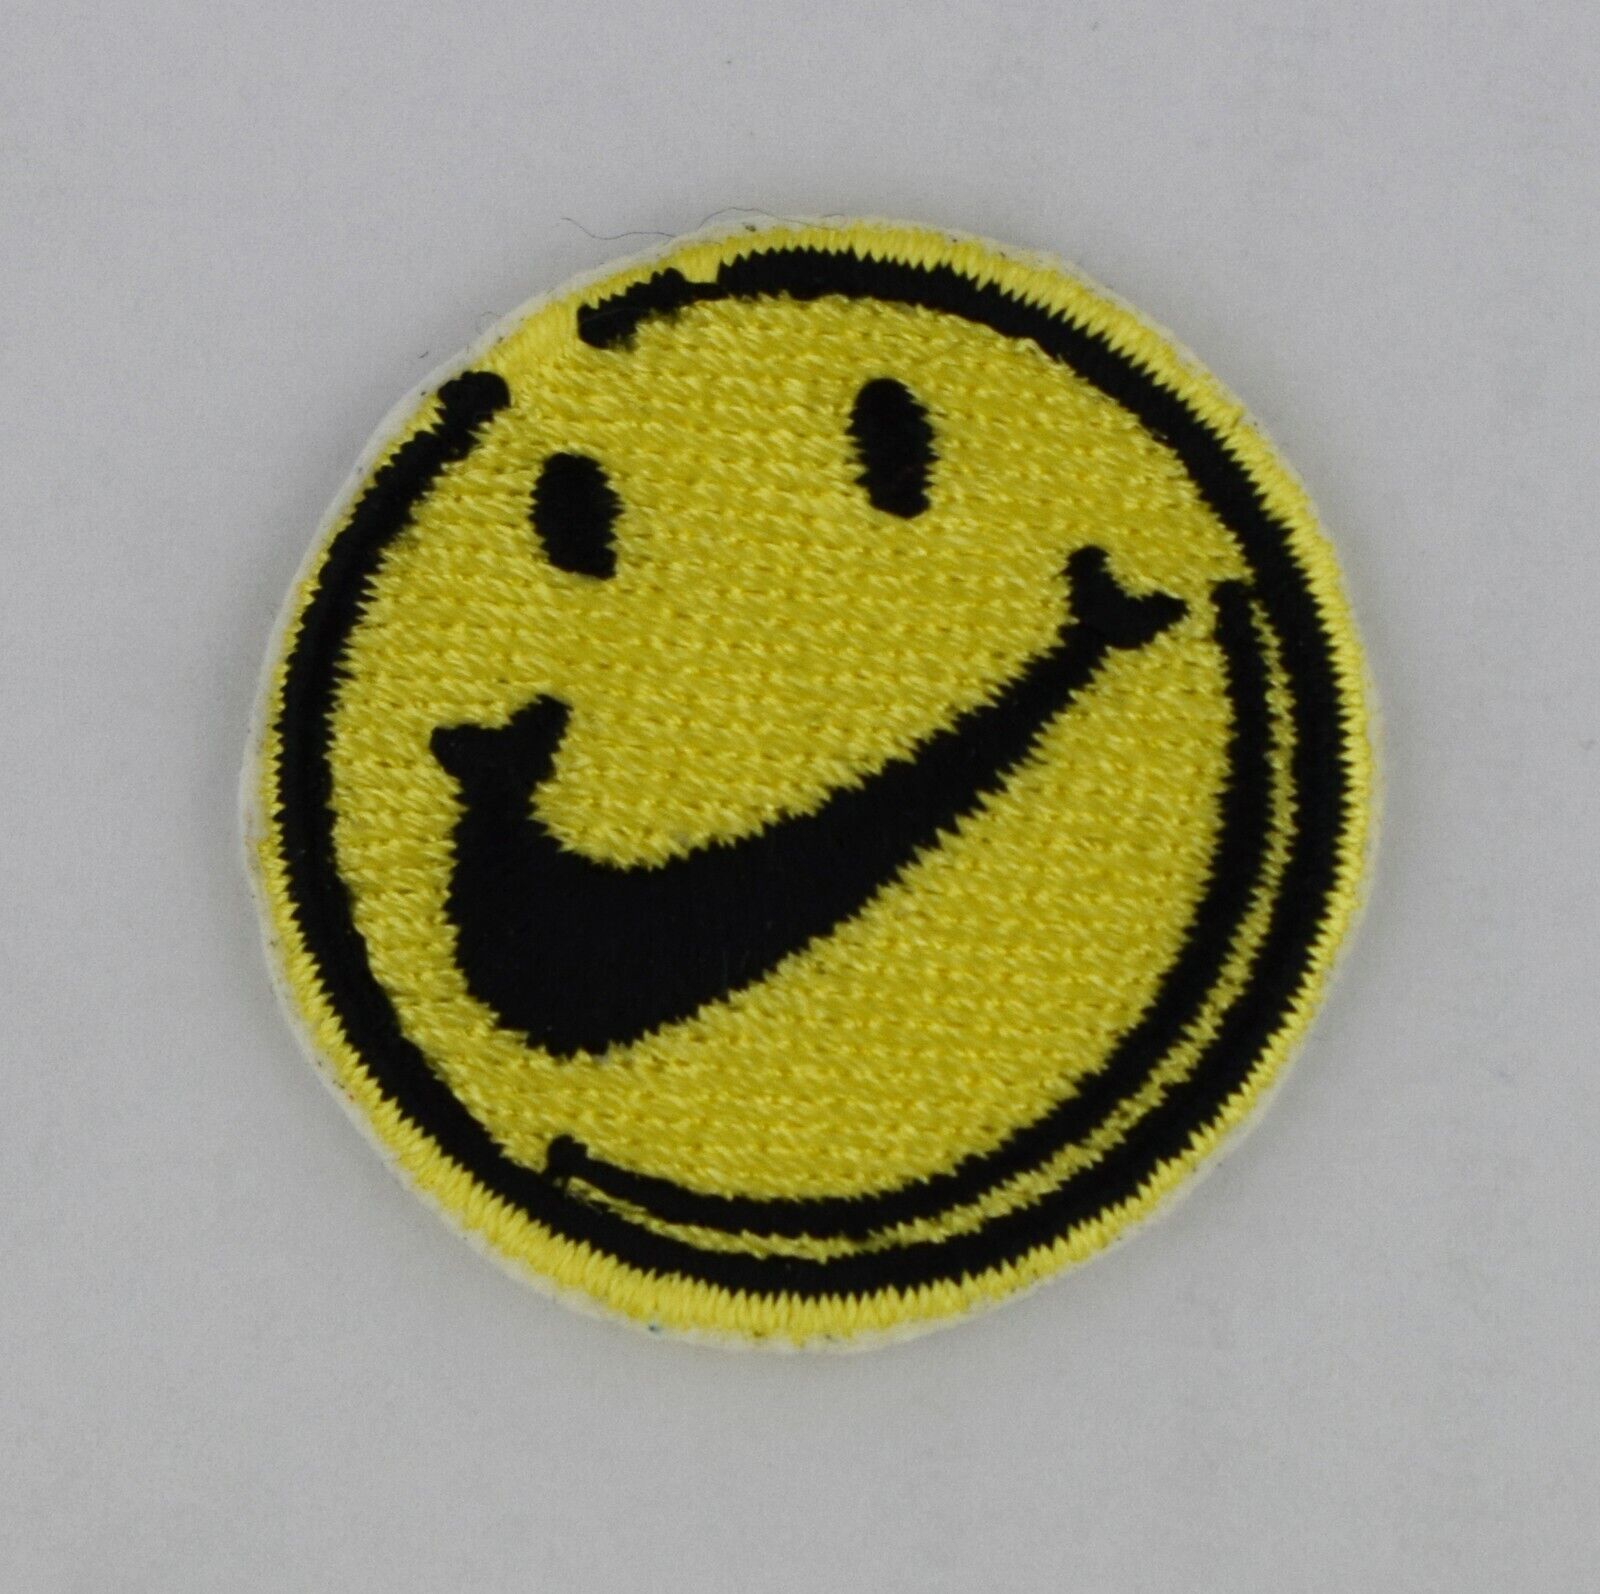 Iron on Patch - Sean Wotherspoon Smiley Face Yellow Embroidered Hip Hop Rap